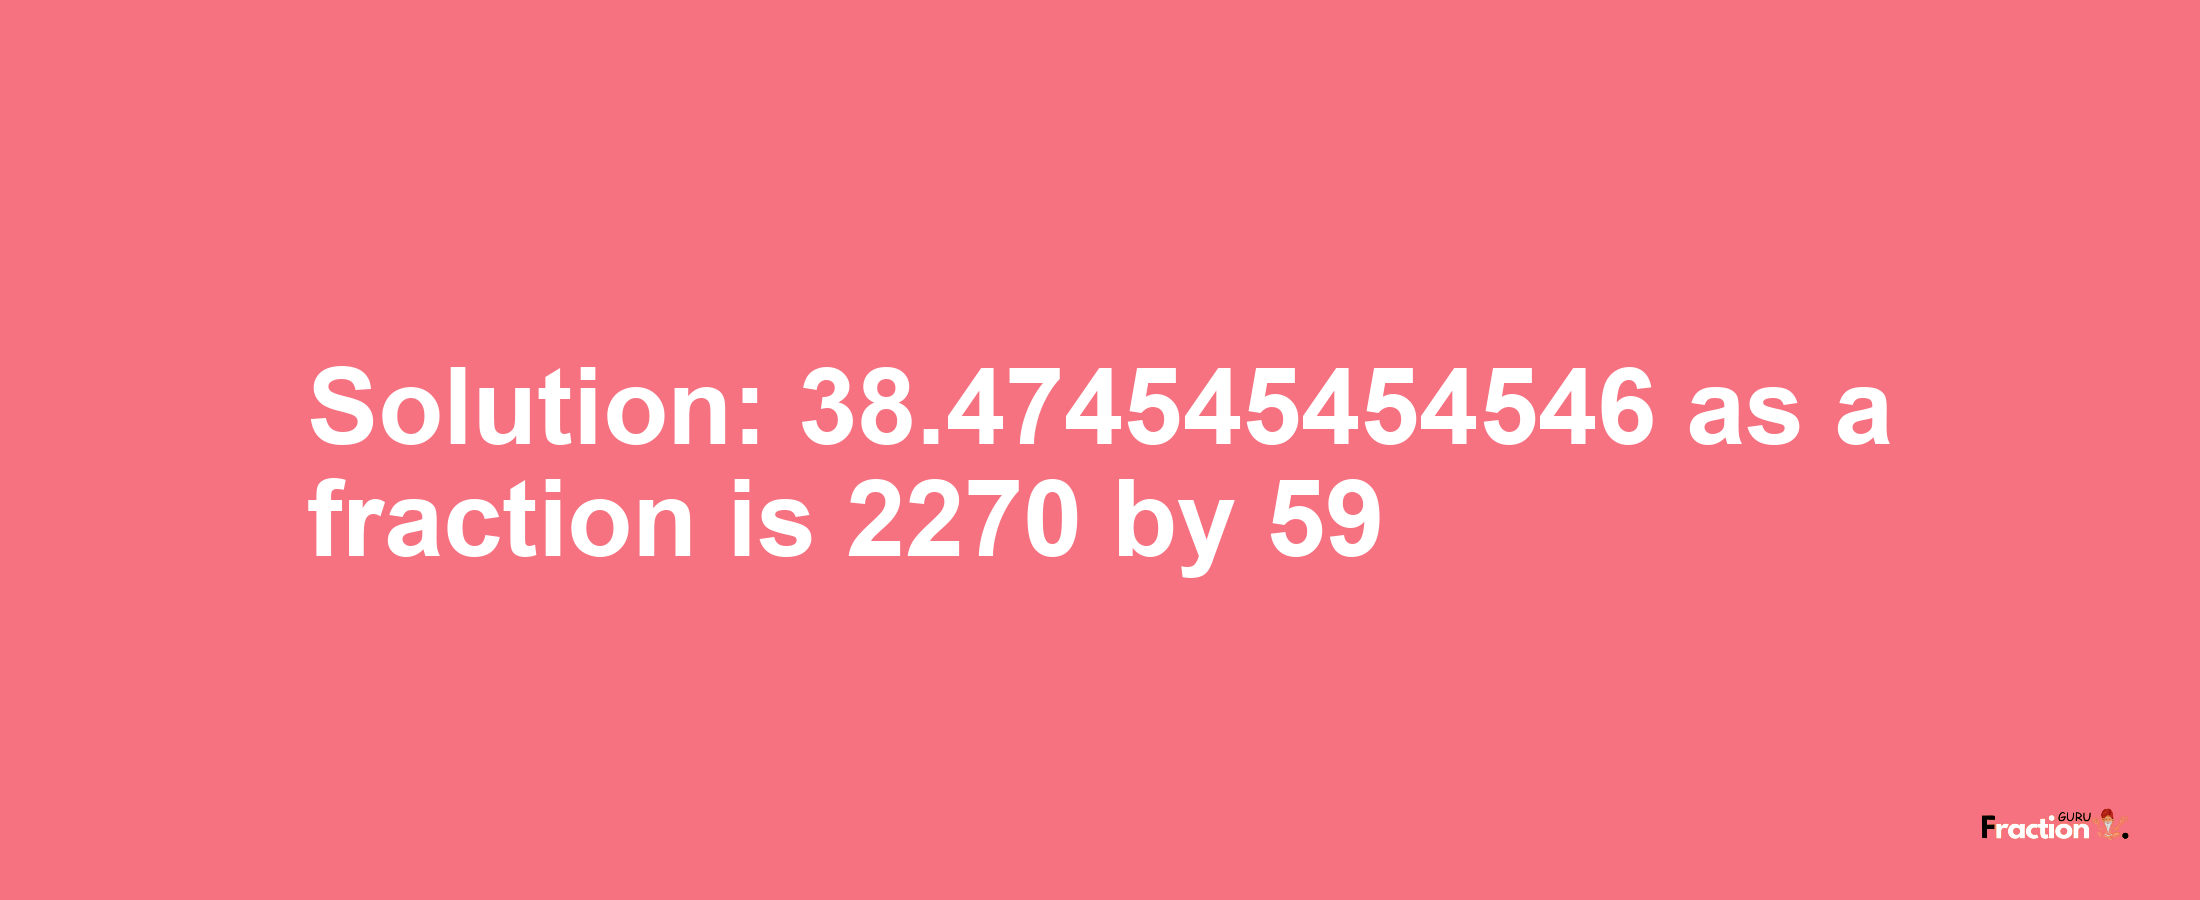 Solution:38.474545454546 as a fraction is 2270/59